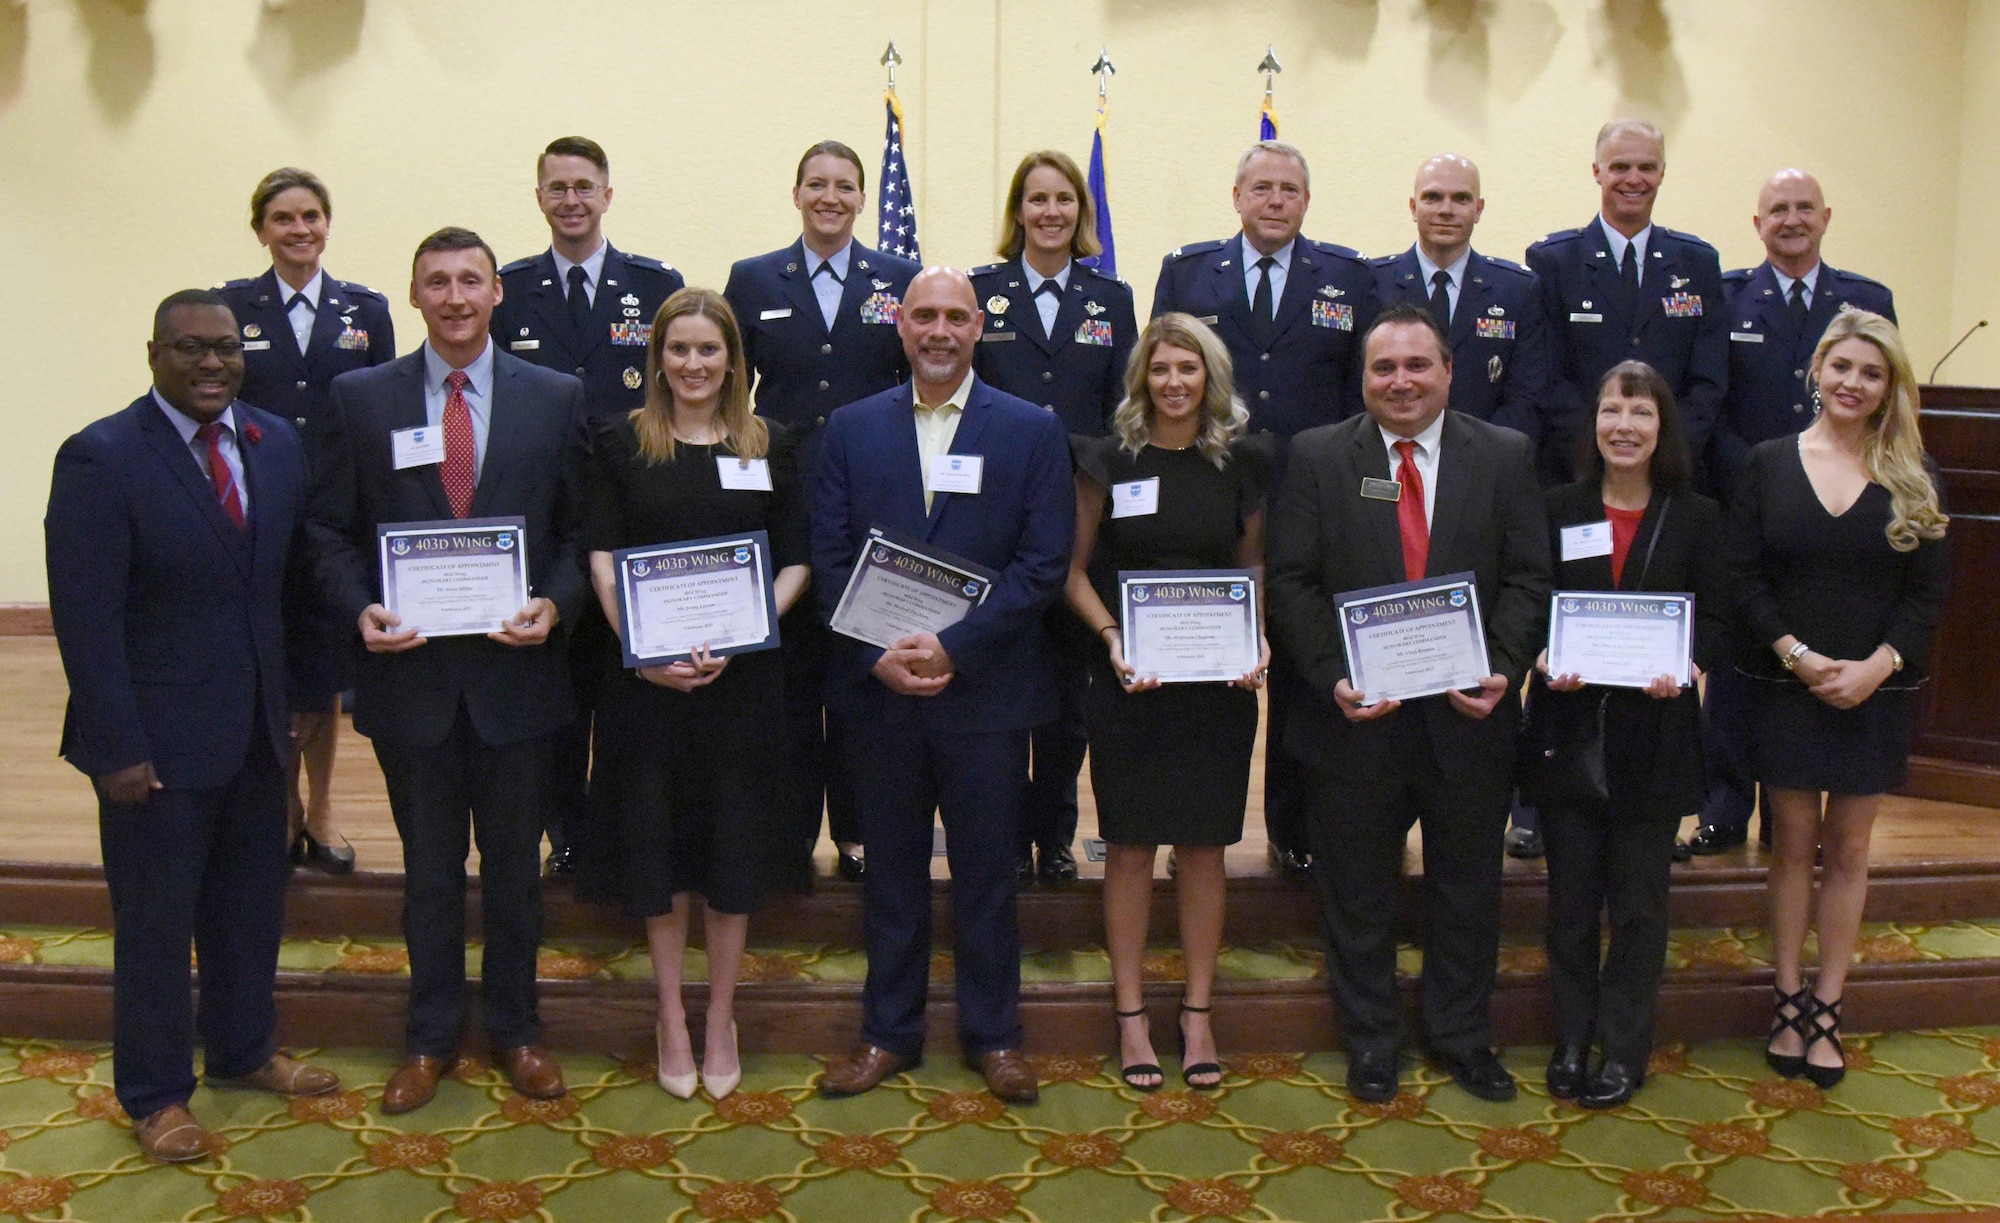 Leadership from the 403rd Wing pose for a group photo with the newly inducted honorary commanders during the 2019 Honorary Commander Induction Ceremony inside the Bay Breeze Event Center at Keesler Air Force Base, Mississippi, Feb. 9, 2019. The event recognized the newest members of Keesler's honorary commander program, which is a partnership between military commanders and local civic and business leaders in order to enrich and strengthen the relationship between the base and the community. This was the first time leadership from the 2nd Air Force, 81st Training Wing and 403rd Wing combined to host a single joint induction ceremony. (U.S. Air Force photo by Kemberly Groue)